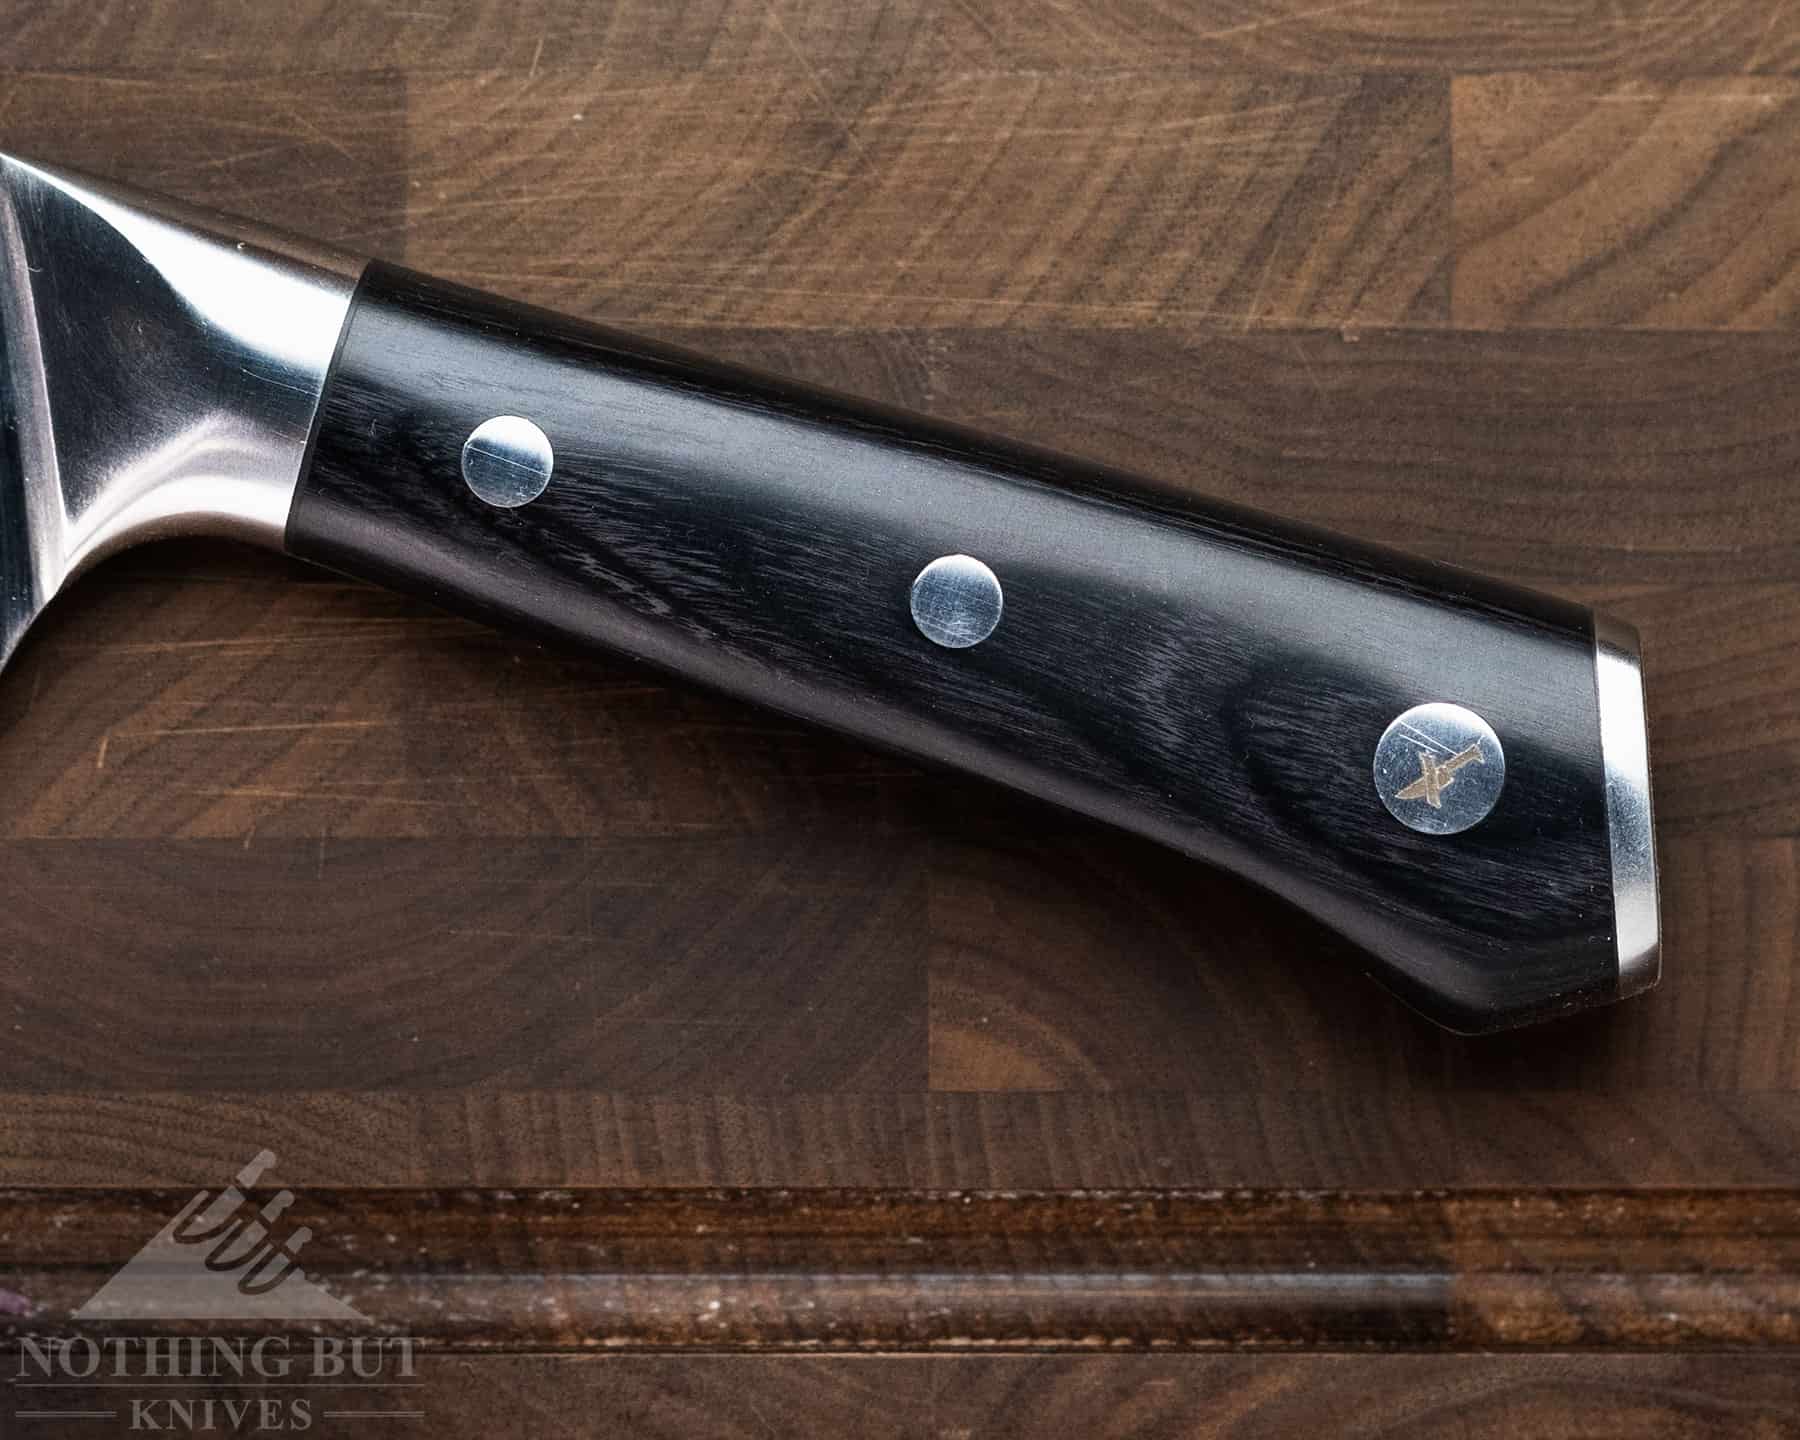 The handle of the Cutluxe Artisan chef knife has a way of locking into your palm, but since the corners are so smooth and heavily rounded, it’s still easy for to shift your grip when cutting food.